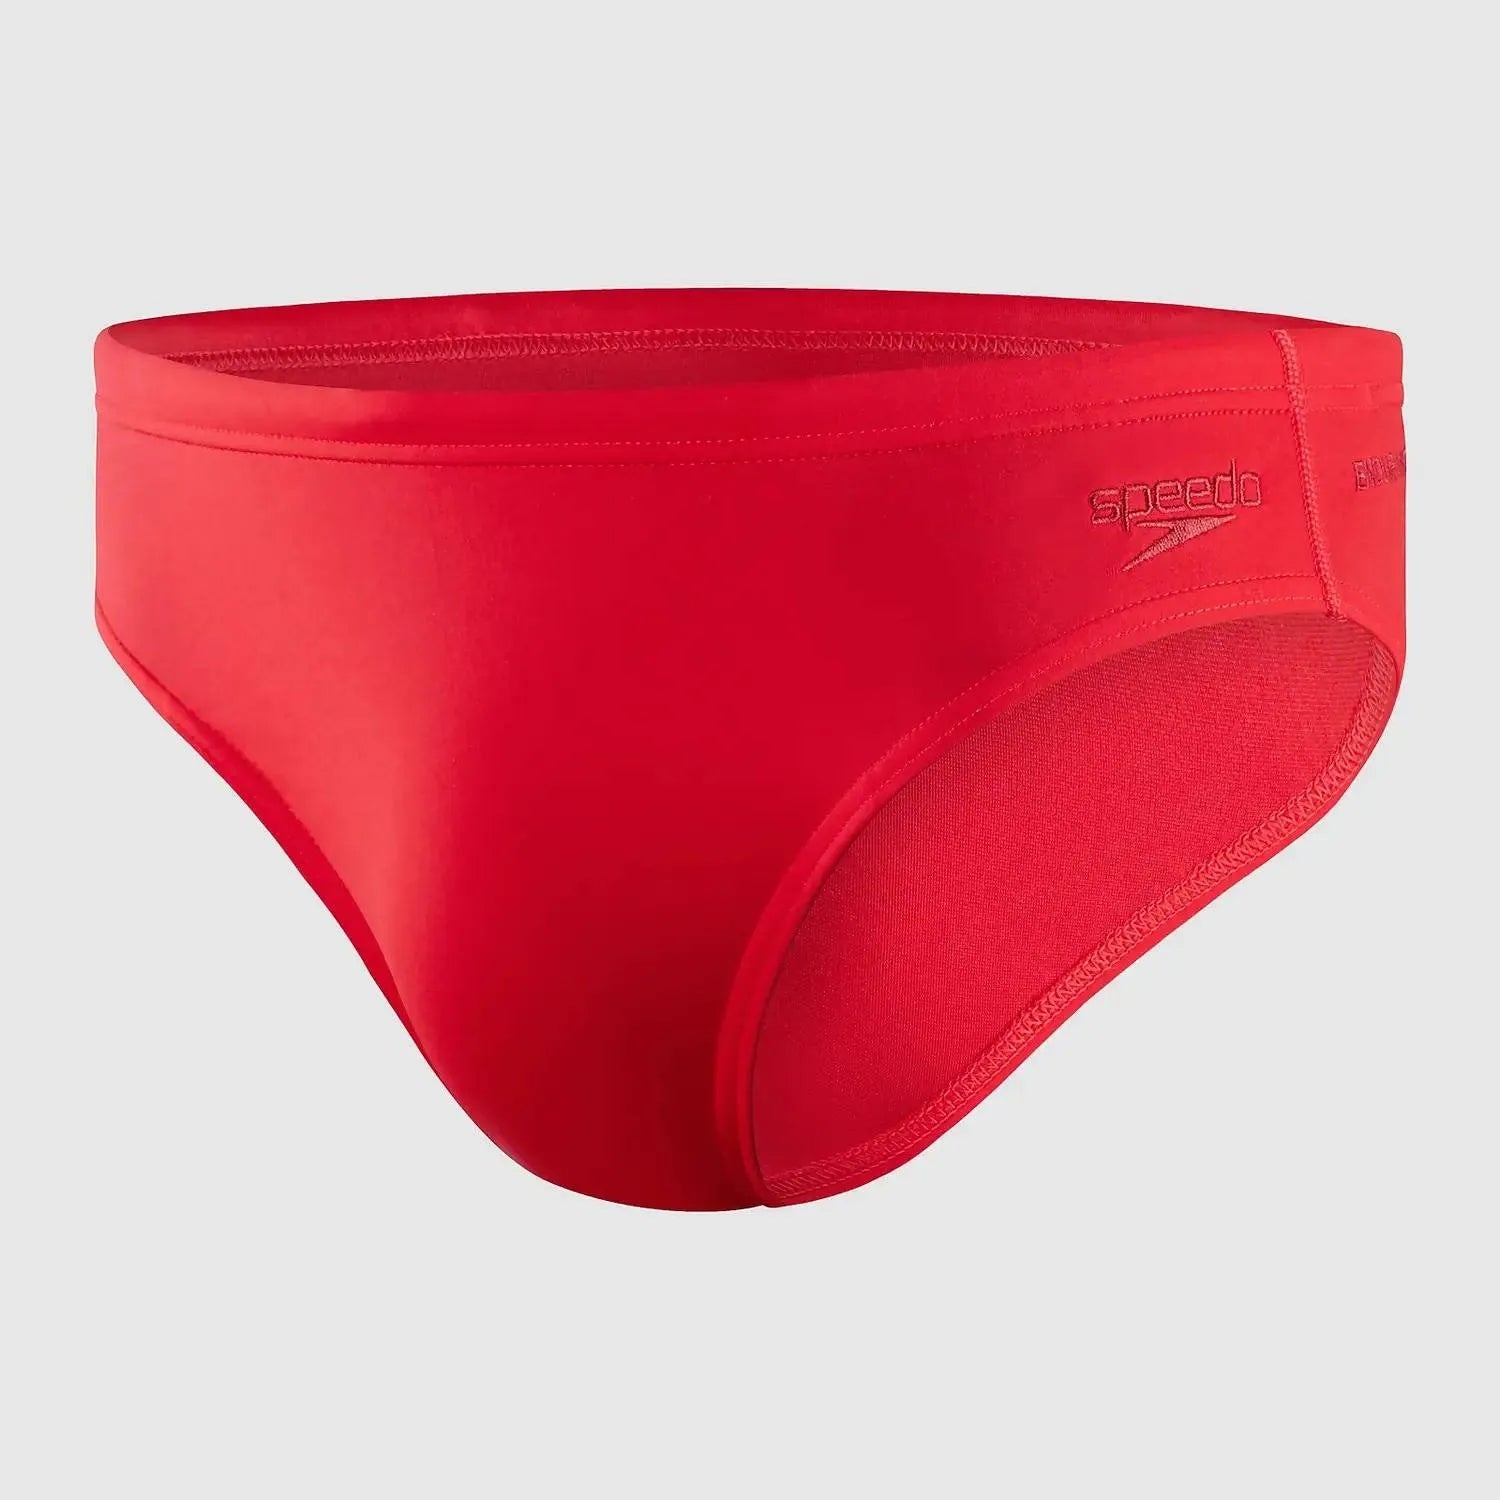 Speedo Red Eco Endurance+ Brief. Sustainable style & performance for your swim (mention size if relevant).Look Good, Feel Good, Do Good. Sustainable performance and bold style in one eco-friendly Speedo brief.